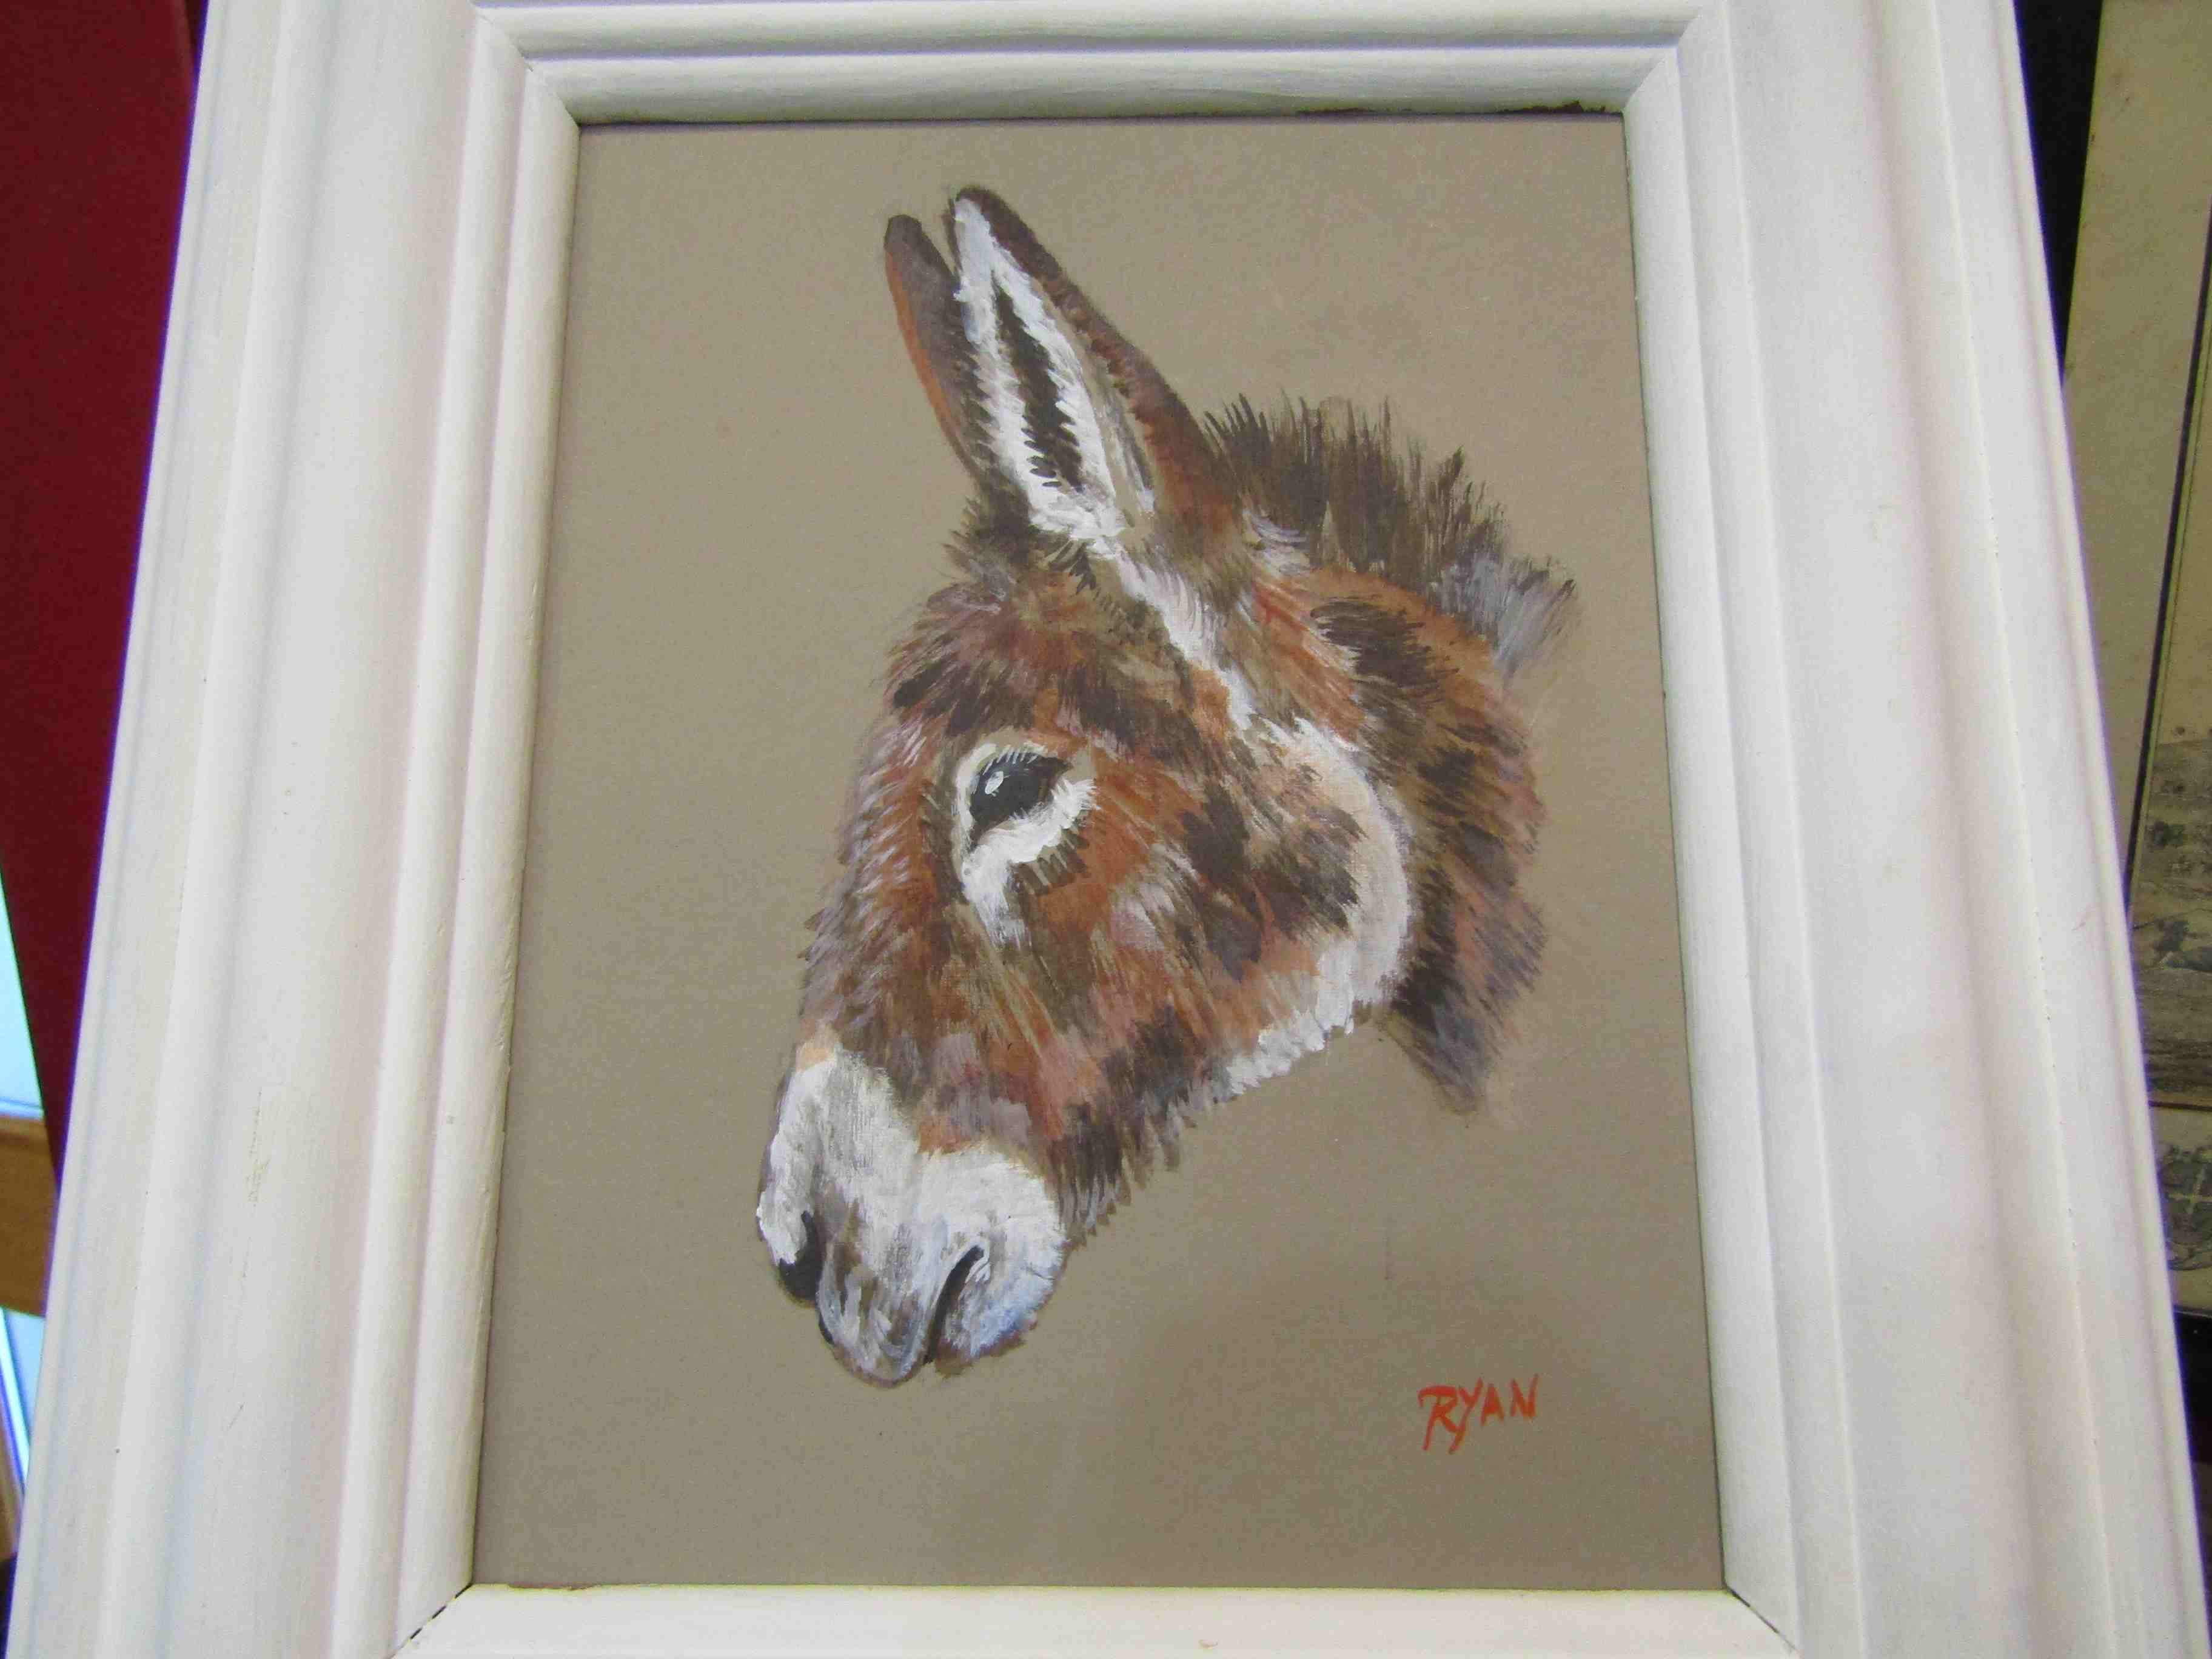 RYAN: Oil on board depicting a donkey, in white painted frame,